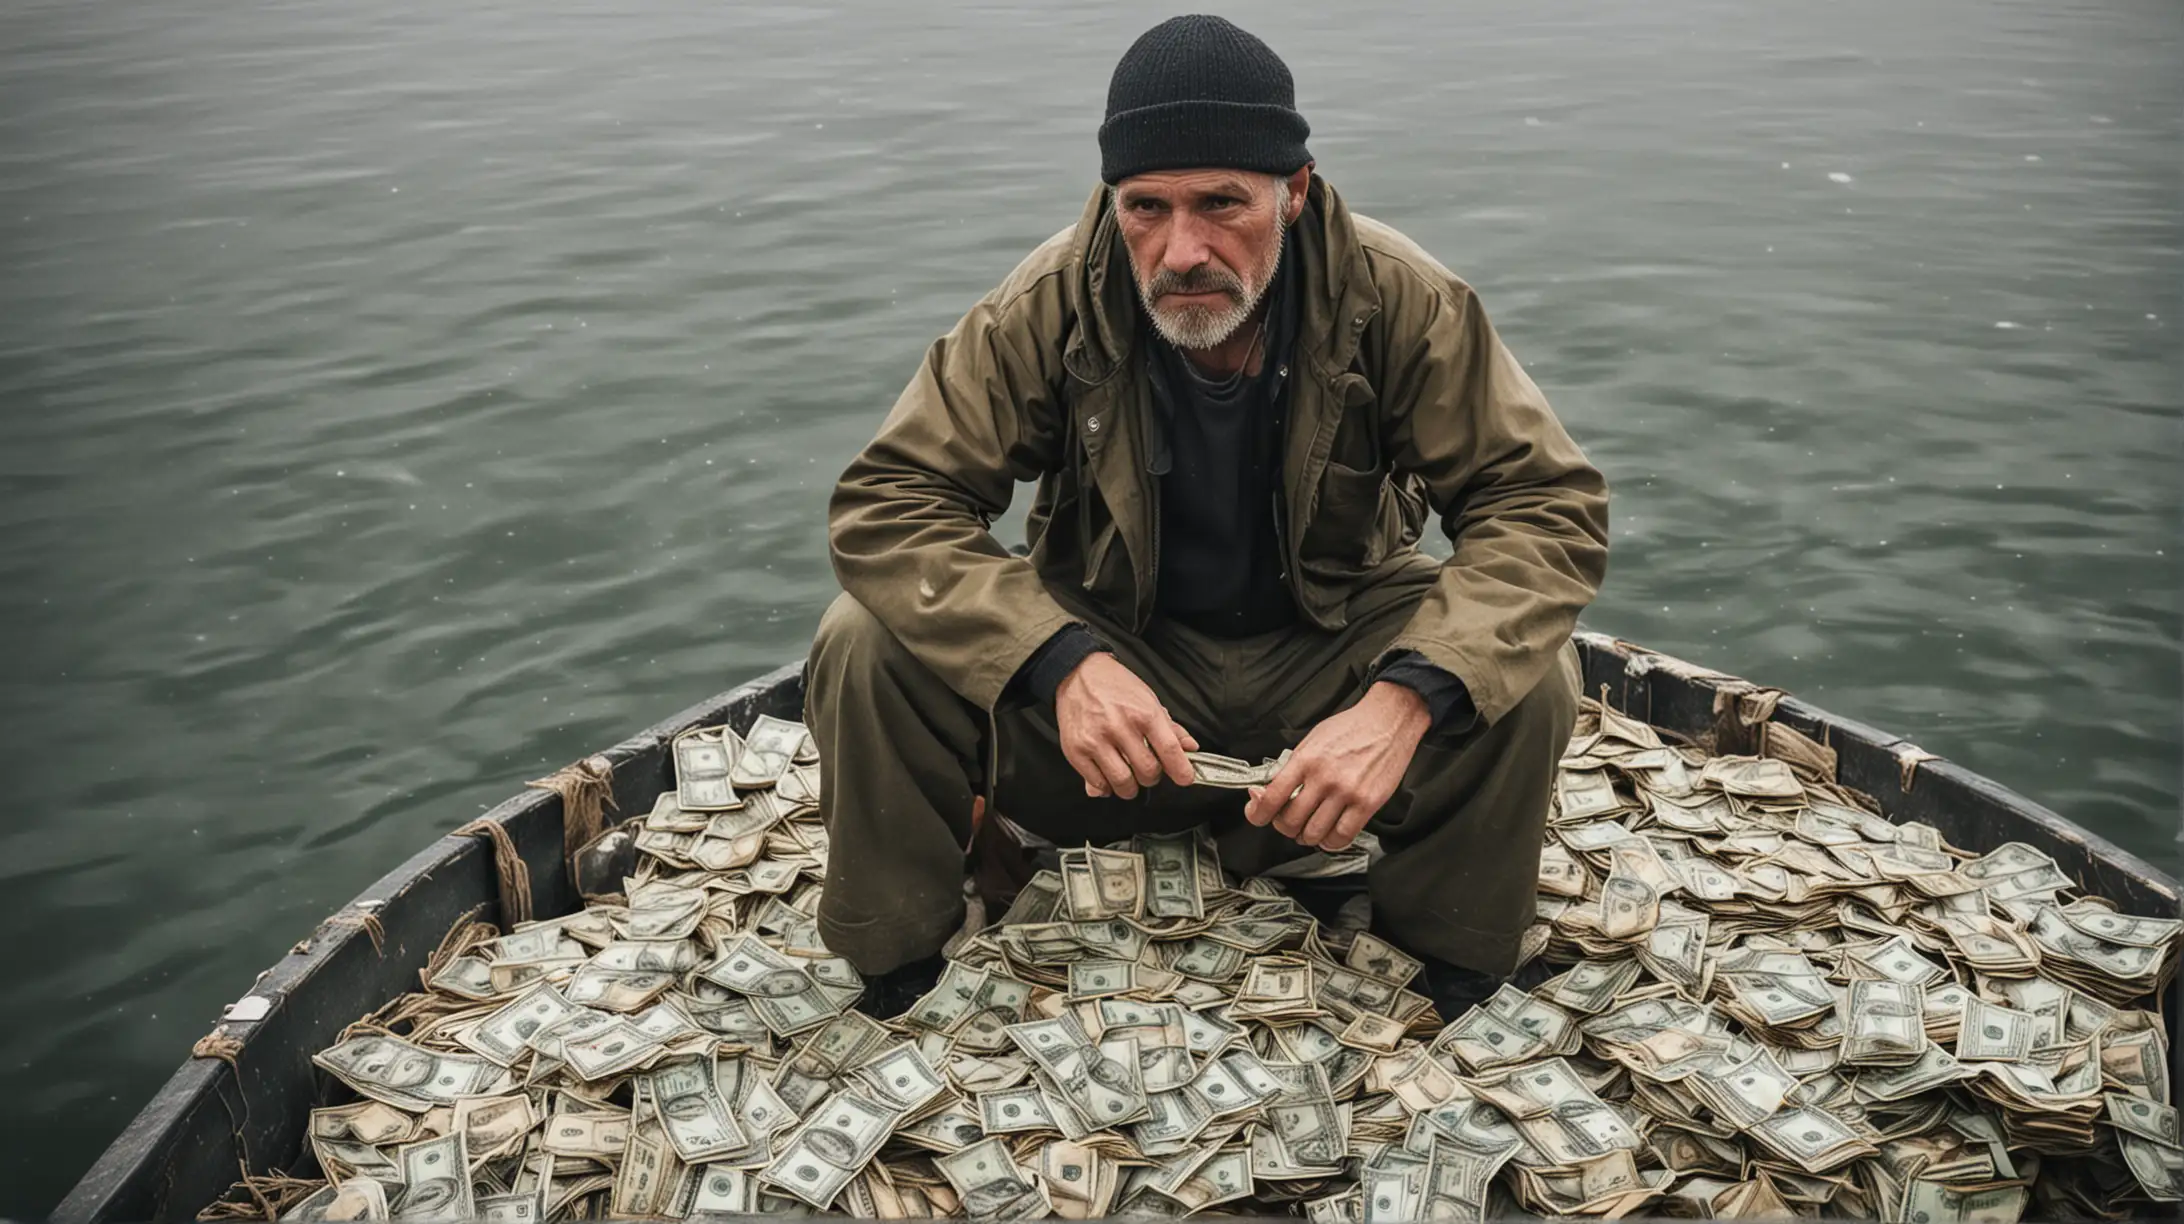 Wealth Transformation From Poor Fisherman to Prosperity